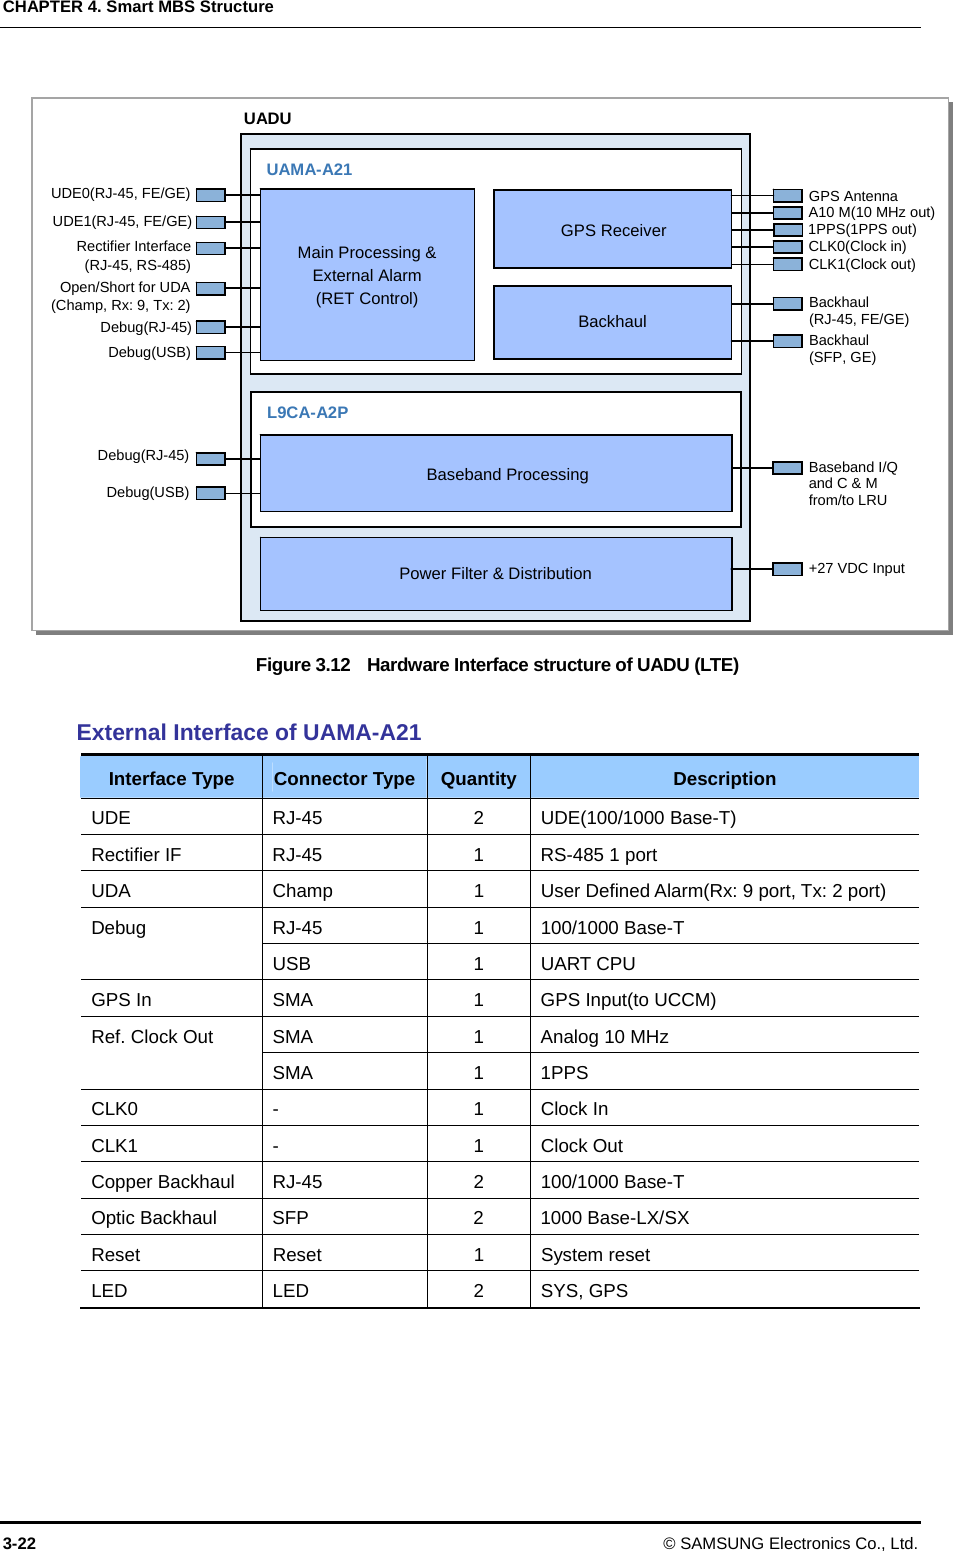 CHAPTER 4. Smart MBS Structure 3-22 © SAMSUNG Electronics Co., Ltd.  Figure 3.12    Hardware Interface structure of UADU (LTE)  External Interface of UAMA-A21 Interface Type  Connector Type Quantity Description UDE RJ-45  2 UDE(100/1000 Base-T) Rectifier IF  RJ-45  1  RS-485 1 port UDA  Champ  1  User Defined Alarm(Rx: 9 port, Tx: 2 port) RJ-45 1 100/1000 Base-T  Debug USB 1 UART CPU GPS In  SMA  1  GPS Input(to UCCM) SMA  1  Analog 10 MHz   Ref. Clock Out SMA 1 1PPS  CLK0 -  1 Clock In CLK1 -  1 Clock Out Copper Backhaul    RJ-45  2  100/1000 Base-T Optic Backhaul  SFP  2  1000 Base-LX/SX Reset Reset  1 System reset LED LED  2 SYS, GPS   L9CA-A2P UAMA-A21   GPS ReceiverBackhaulUADU UDE0(RJ-45, FE/GE) UDE1(RJ-45, FE/GE) Rectifier Interface (RJ-45, RS-485) Debug(RJ-45) GPS Antenna CLK1(Clock out) Backhaul (RJ-45, FE/GE) Backhaul (SFP, GE)  Power Filter &amp; DistributionCLK0(Clock in) A10 M(10 MHz out) 1PPS(1PPS out) Baseband I/Q and C &amp; M from/to LRU +27 VDC Input Debug(USB)  Baseband Processing Open/Short for UDA (Champ, Rx: 9, Tx: 2) Debug(RJ-45)  Debug(USB)  Main Processing &amp; External Alarm (RET Control) 